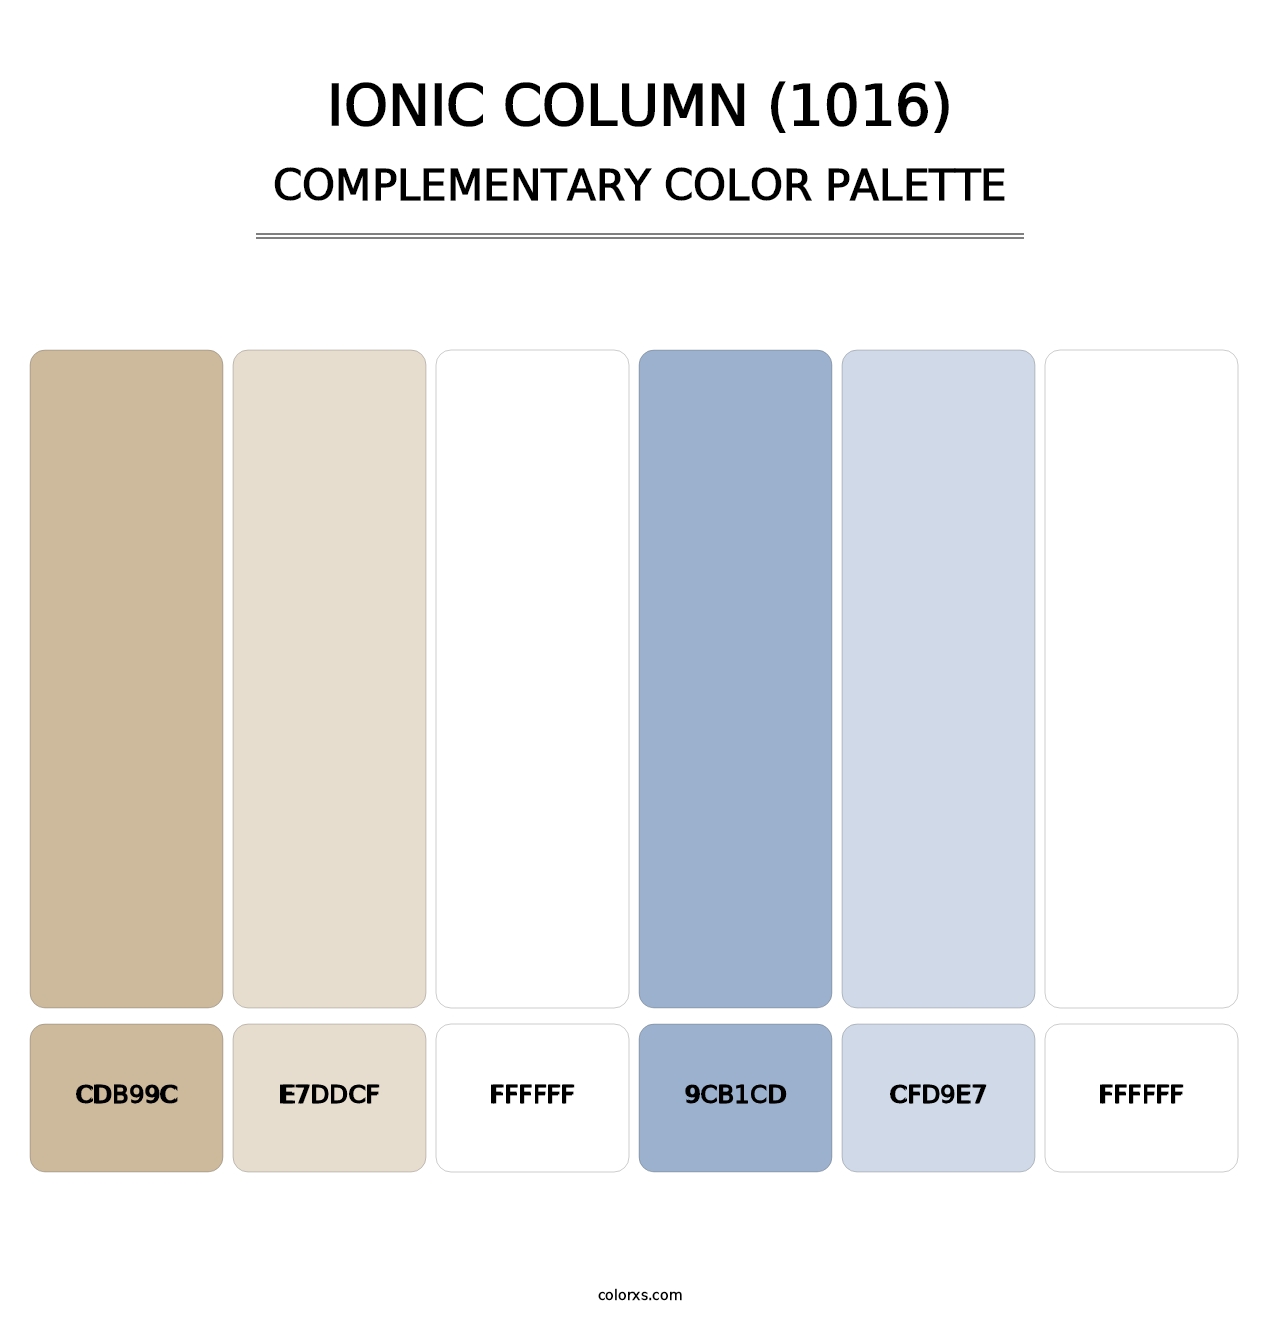 Ionic Column (1016) - Complementary Color Palette